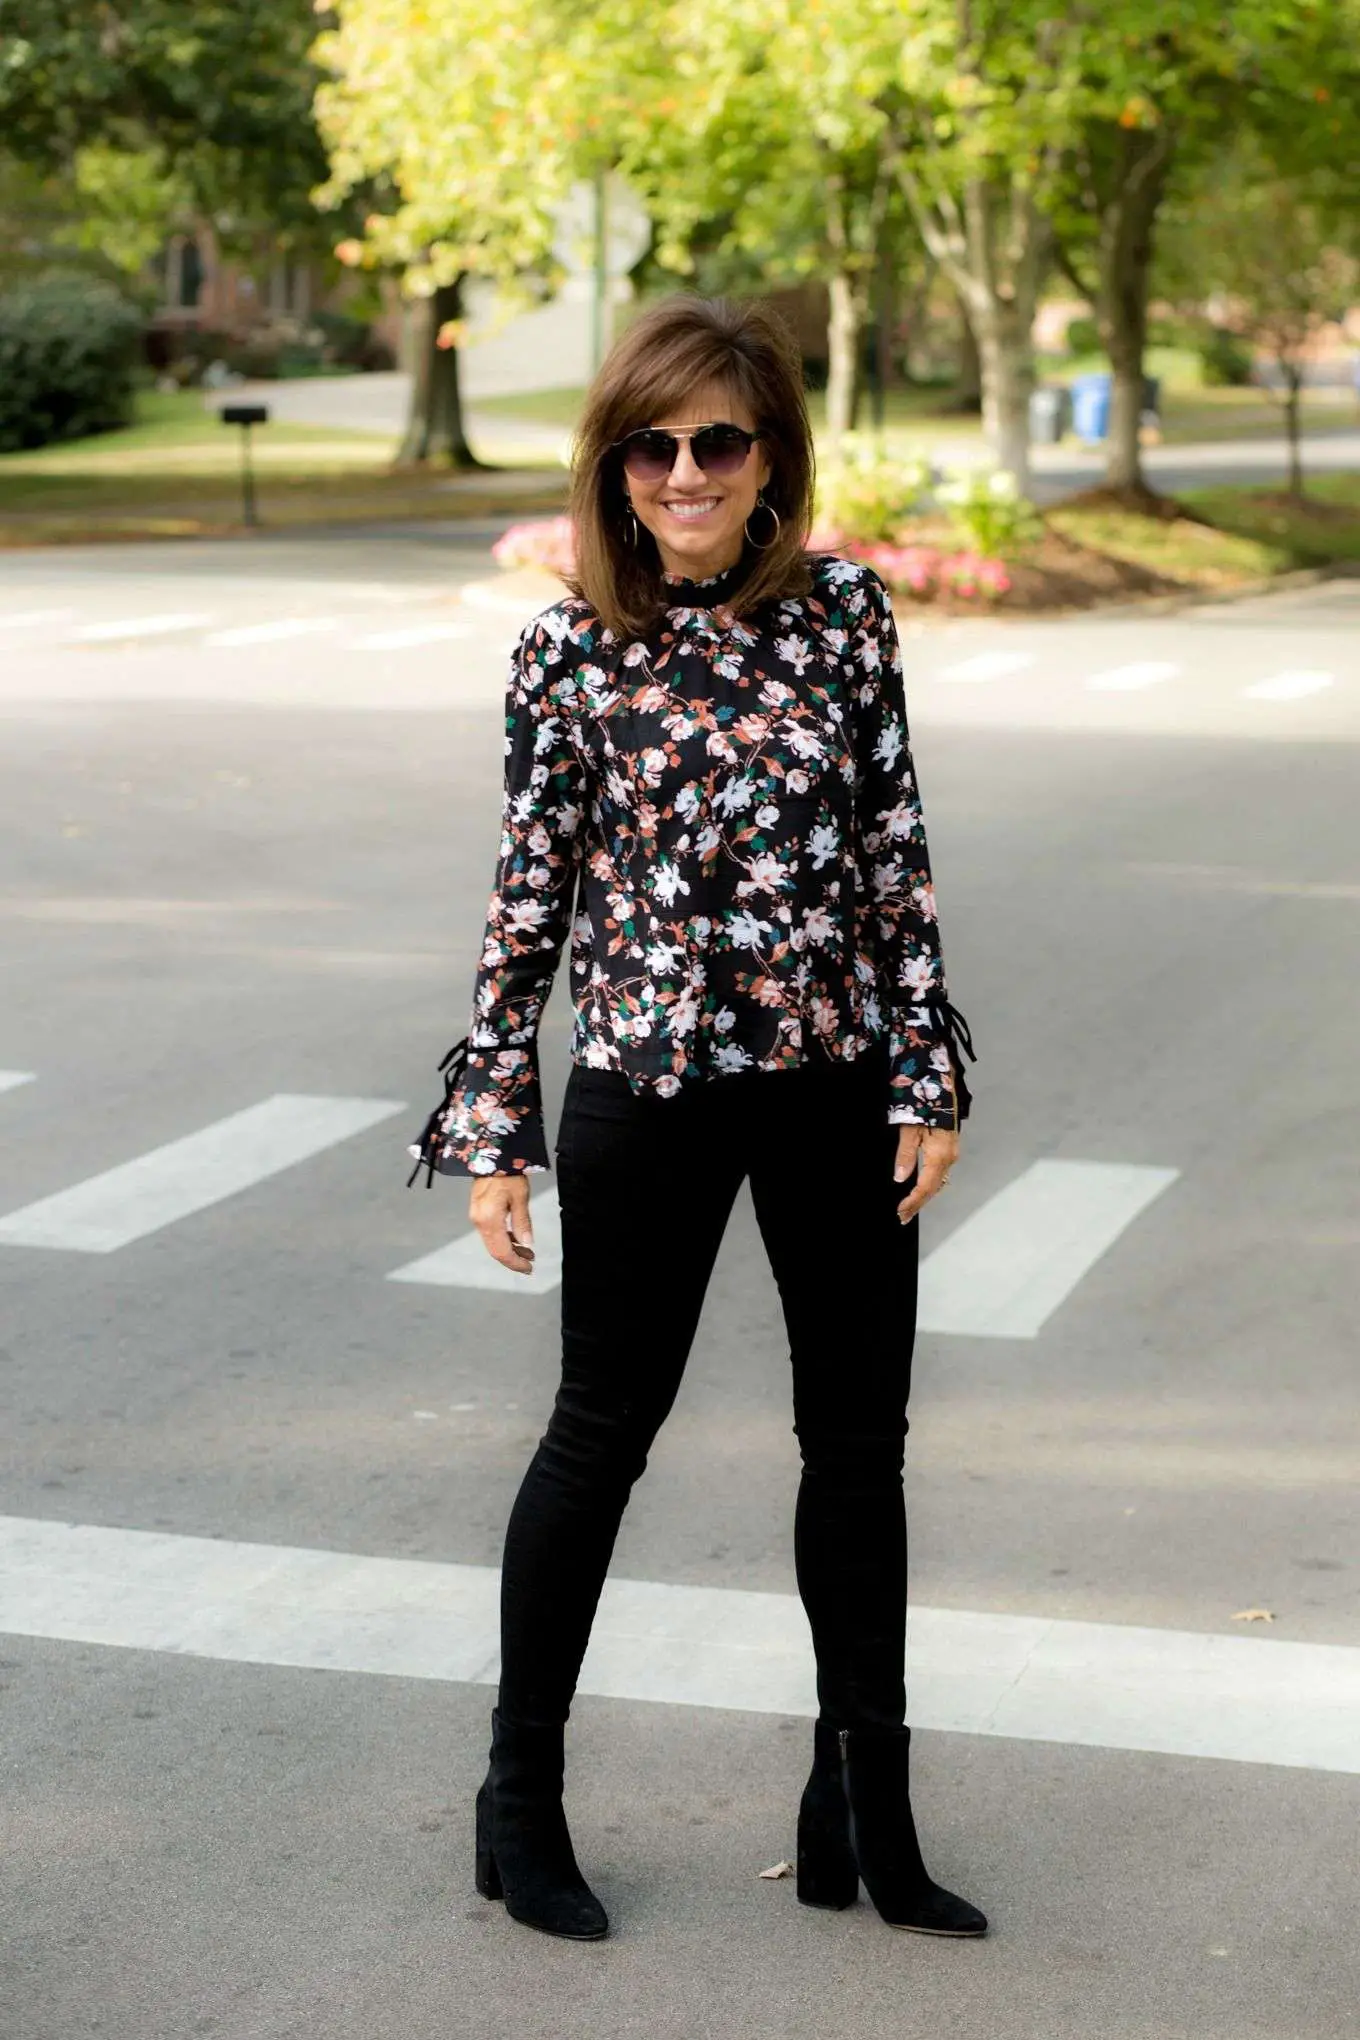 Flowy Floral Blouse With Black Jeans